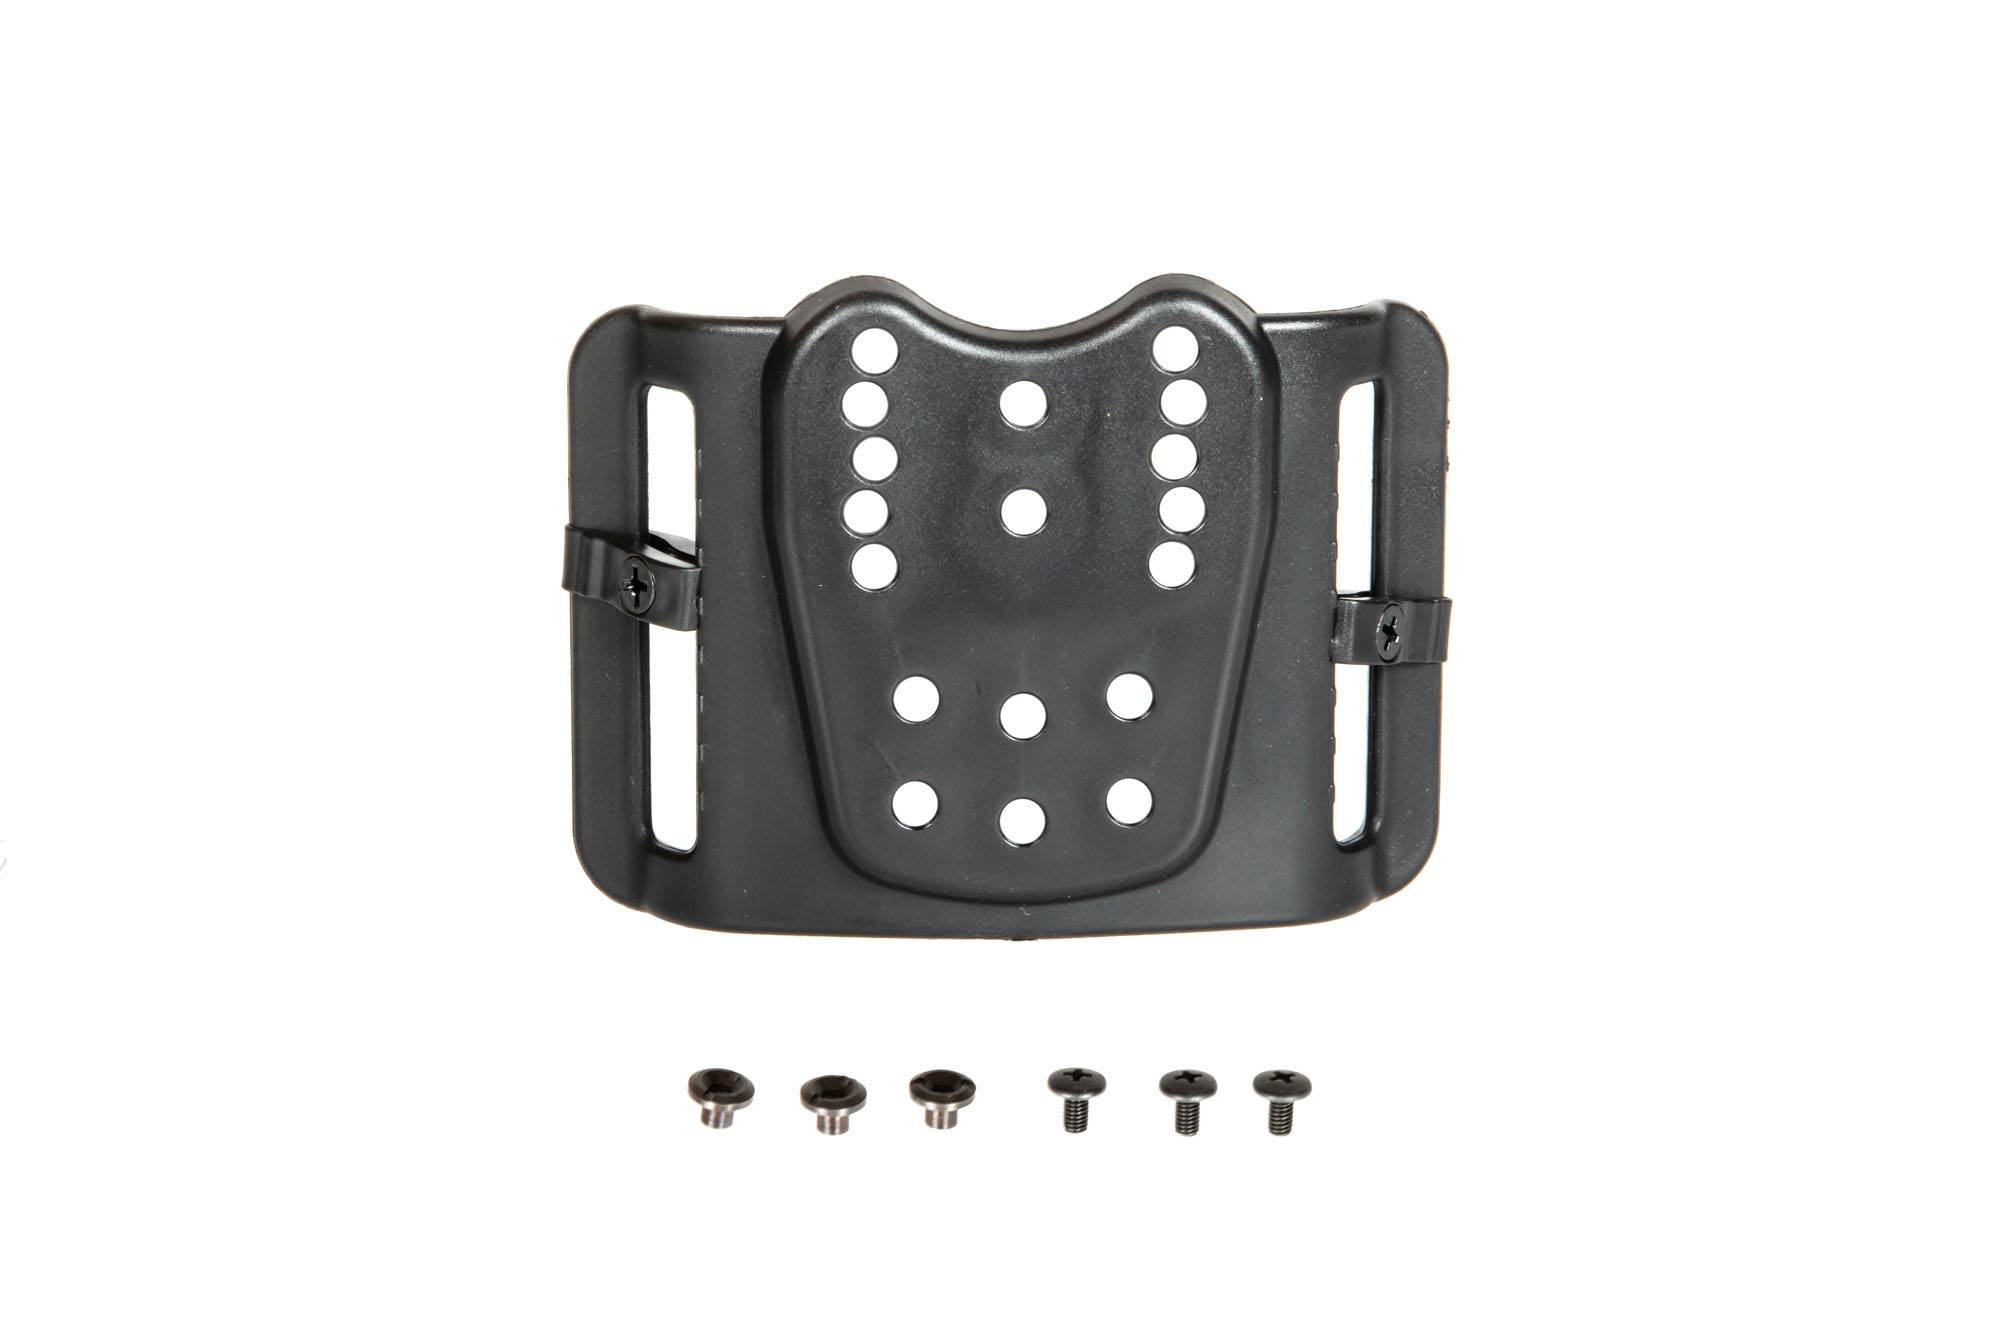 Kydex Holster for G17 Replicas - Black